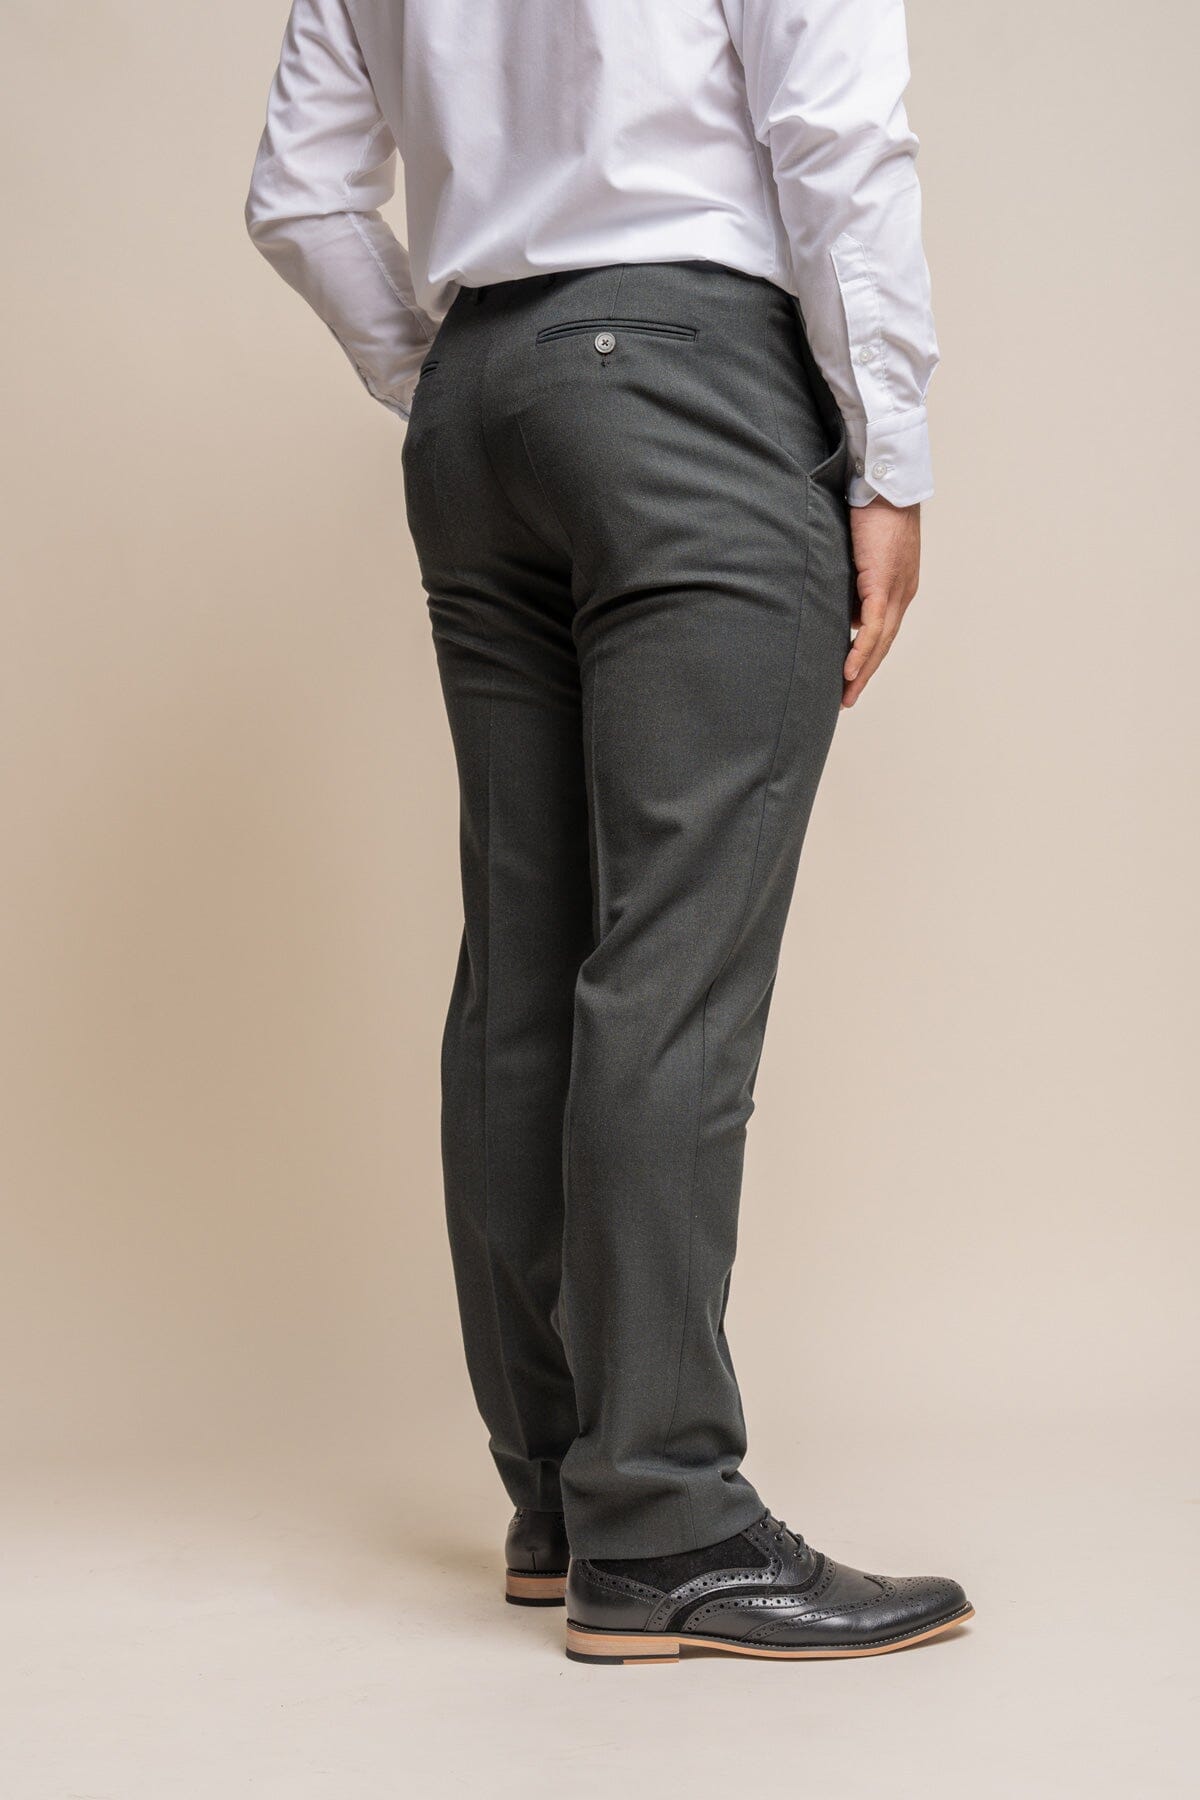 Furious Olive Trousers - Trousers - 